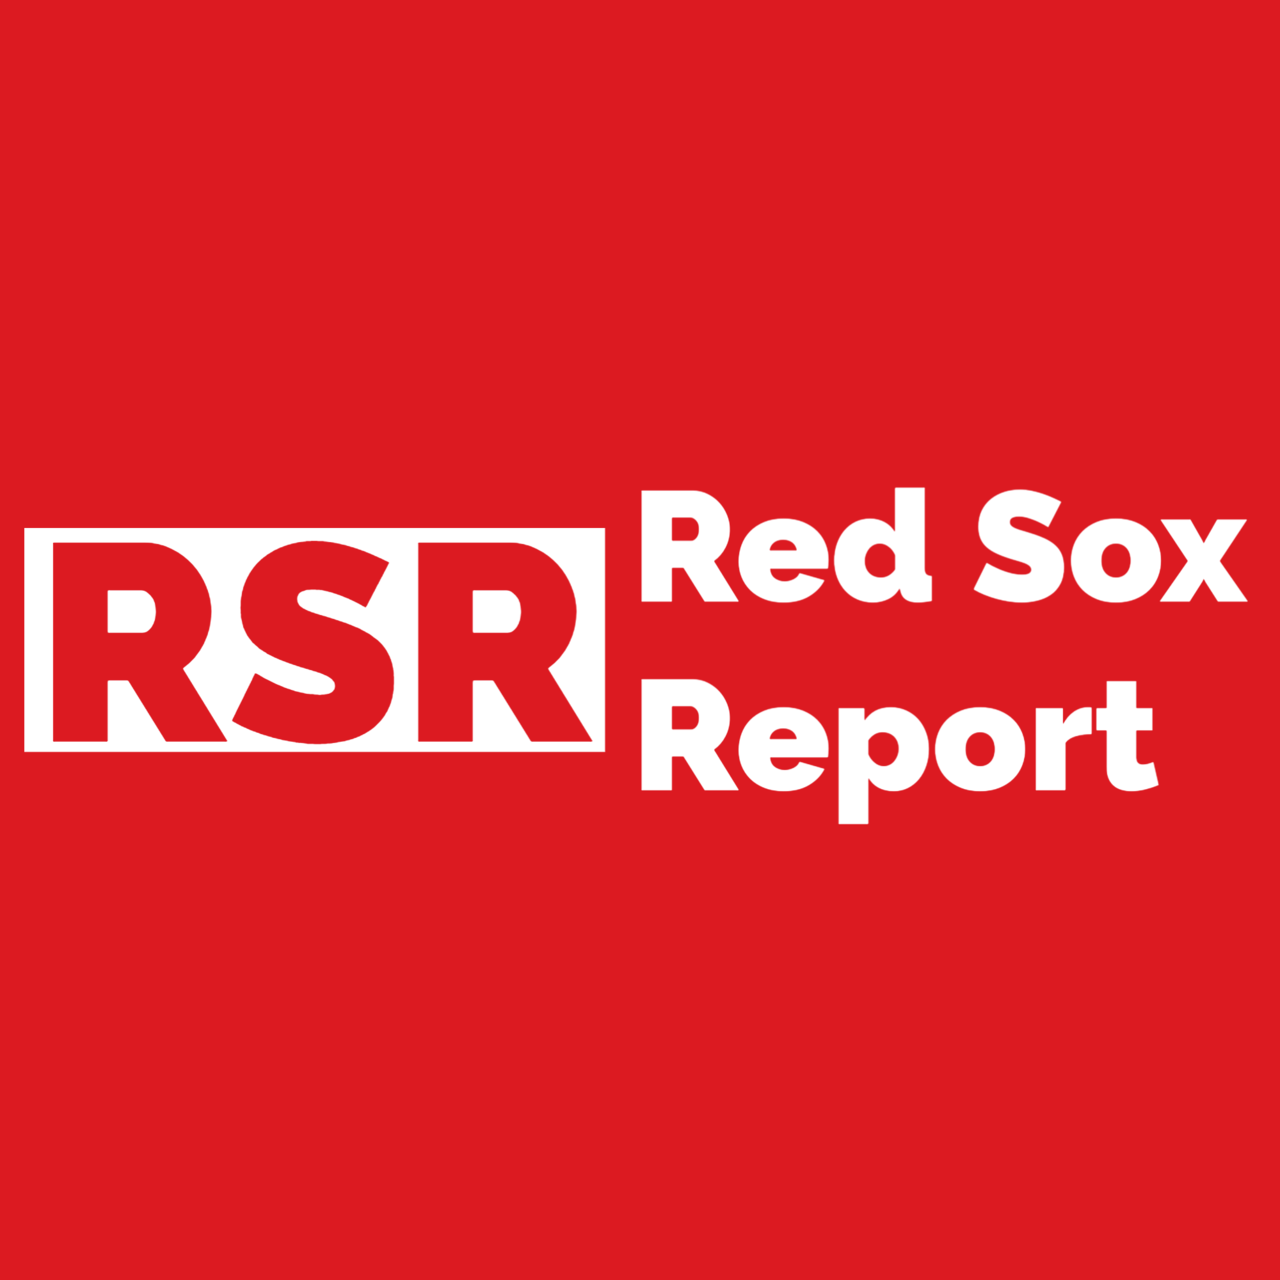 Artwork for Red Sox Report